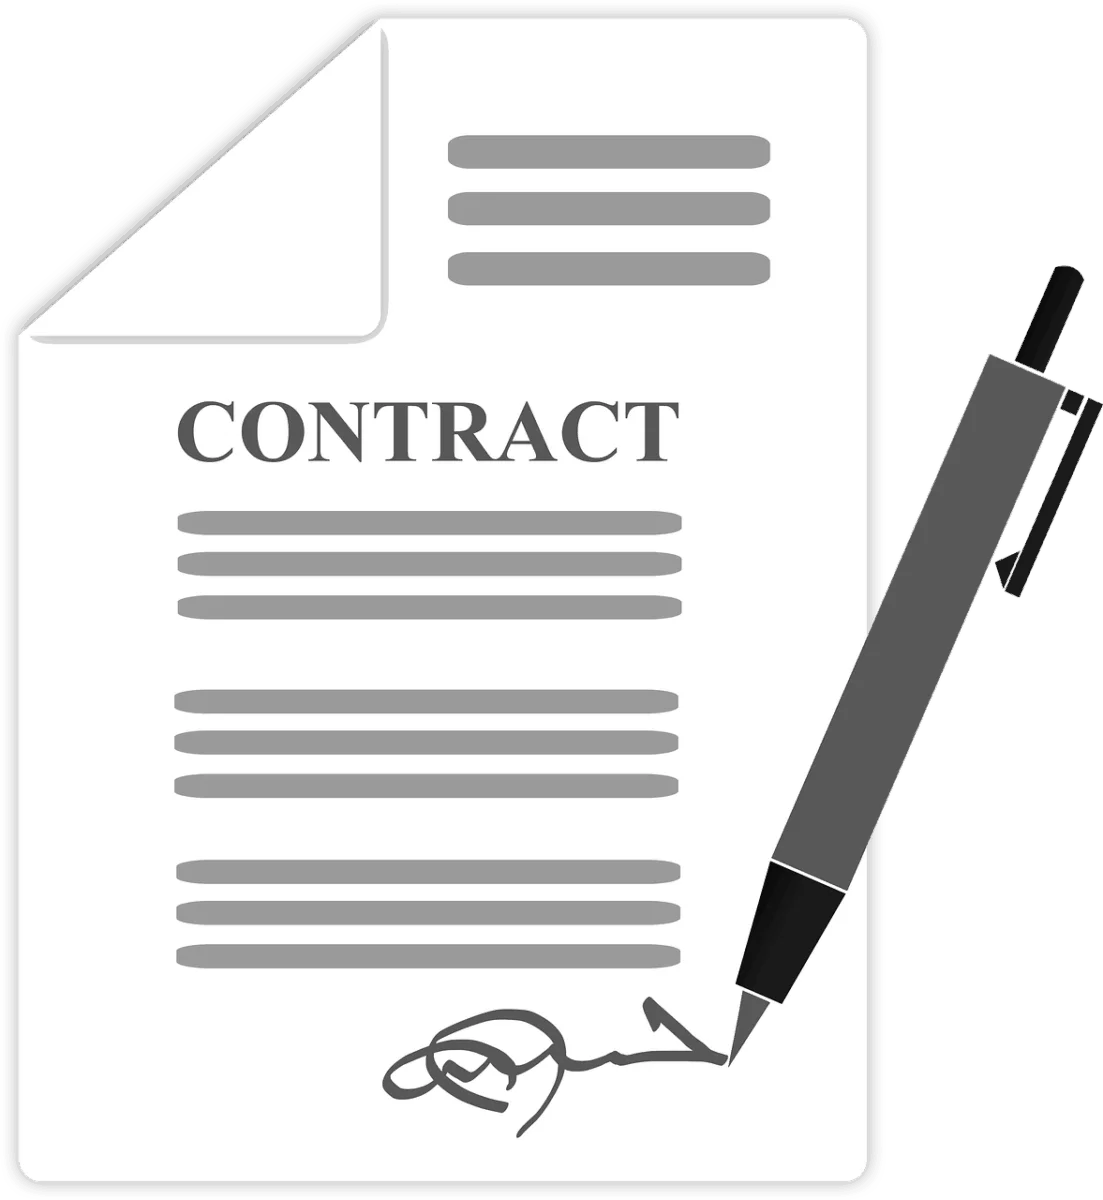 Why are contracts important?